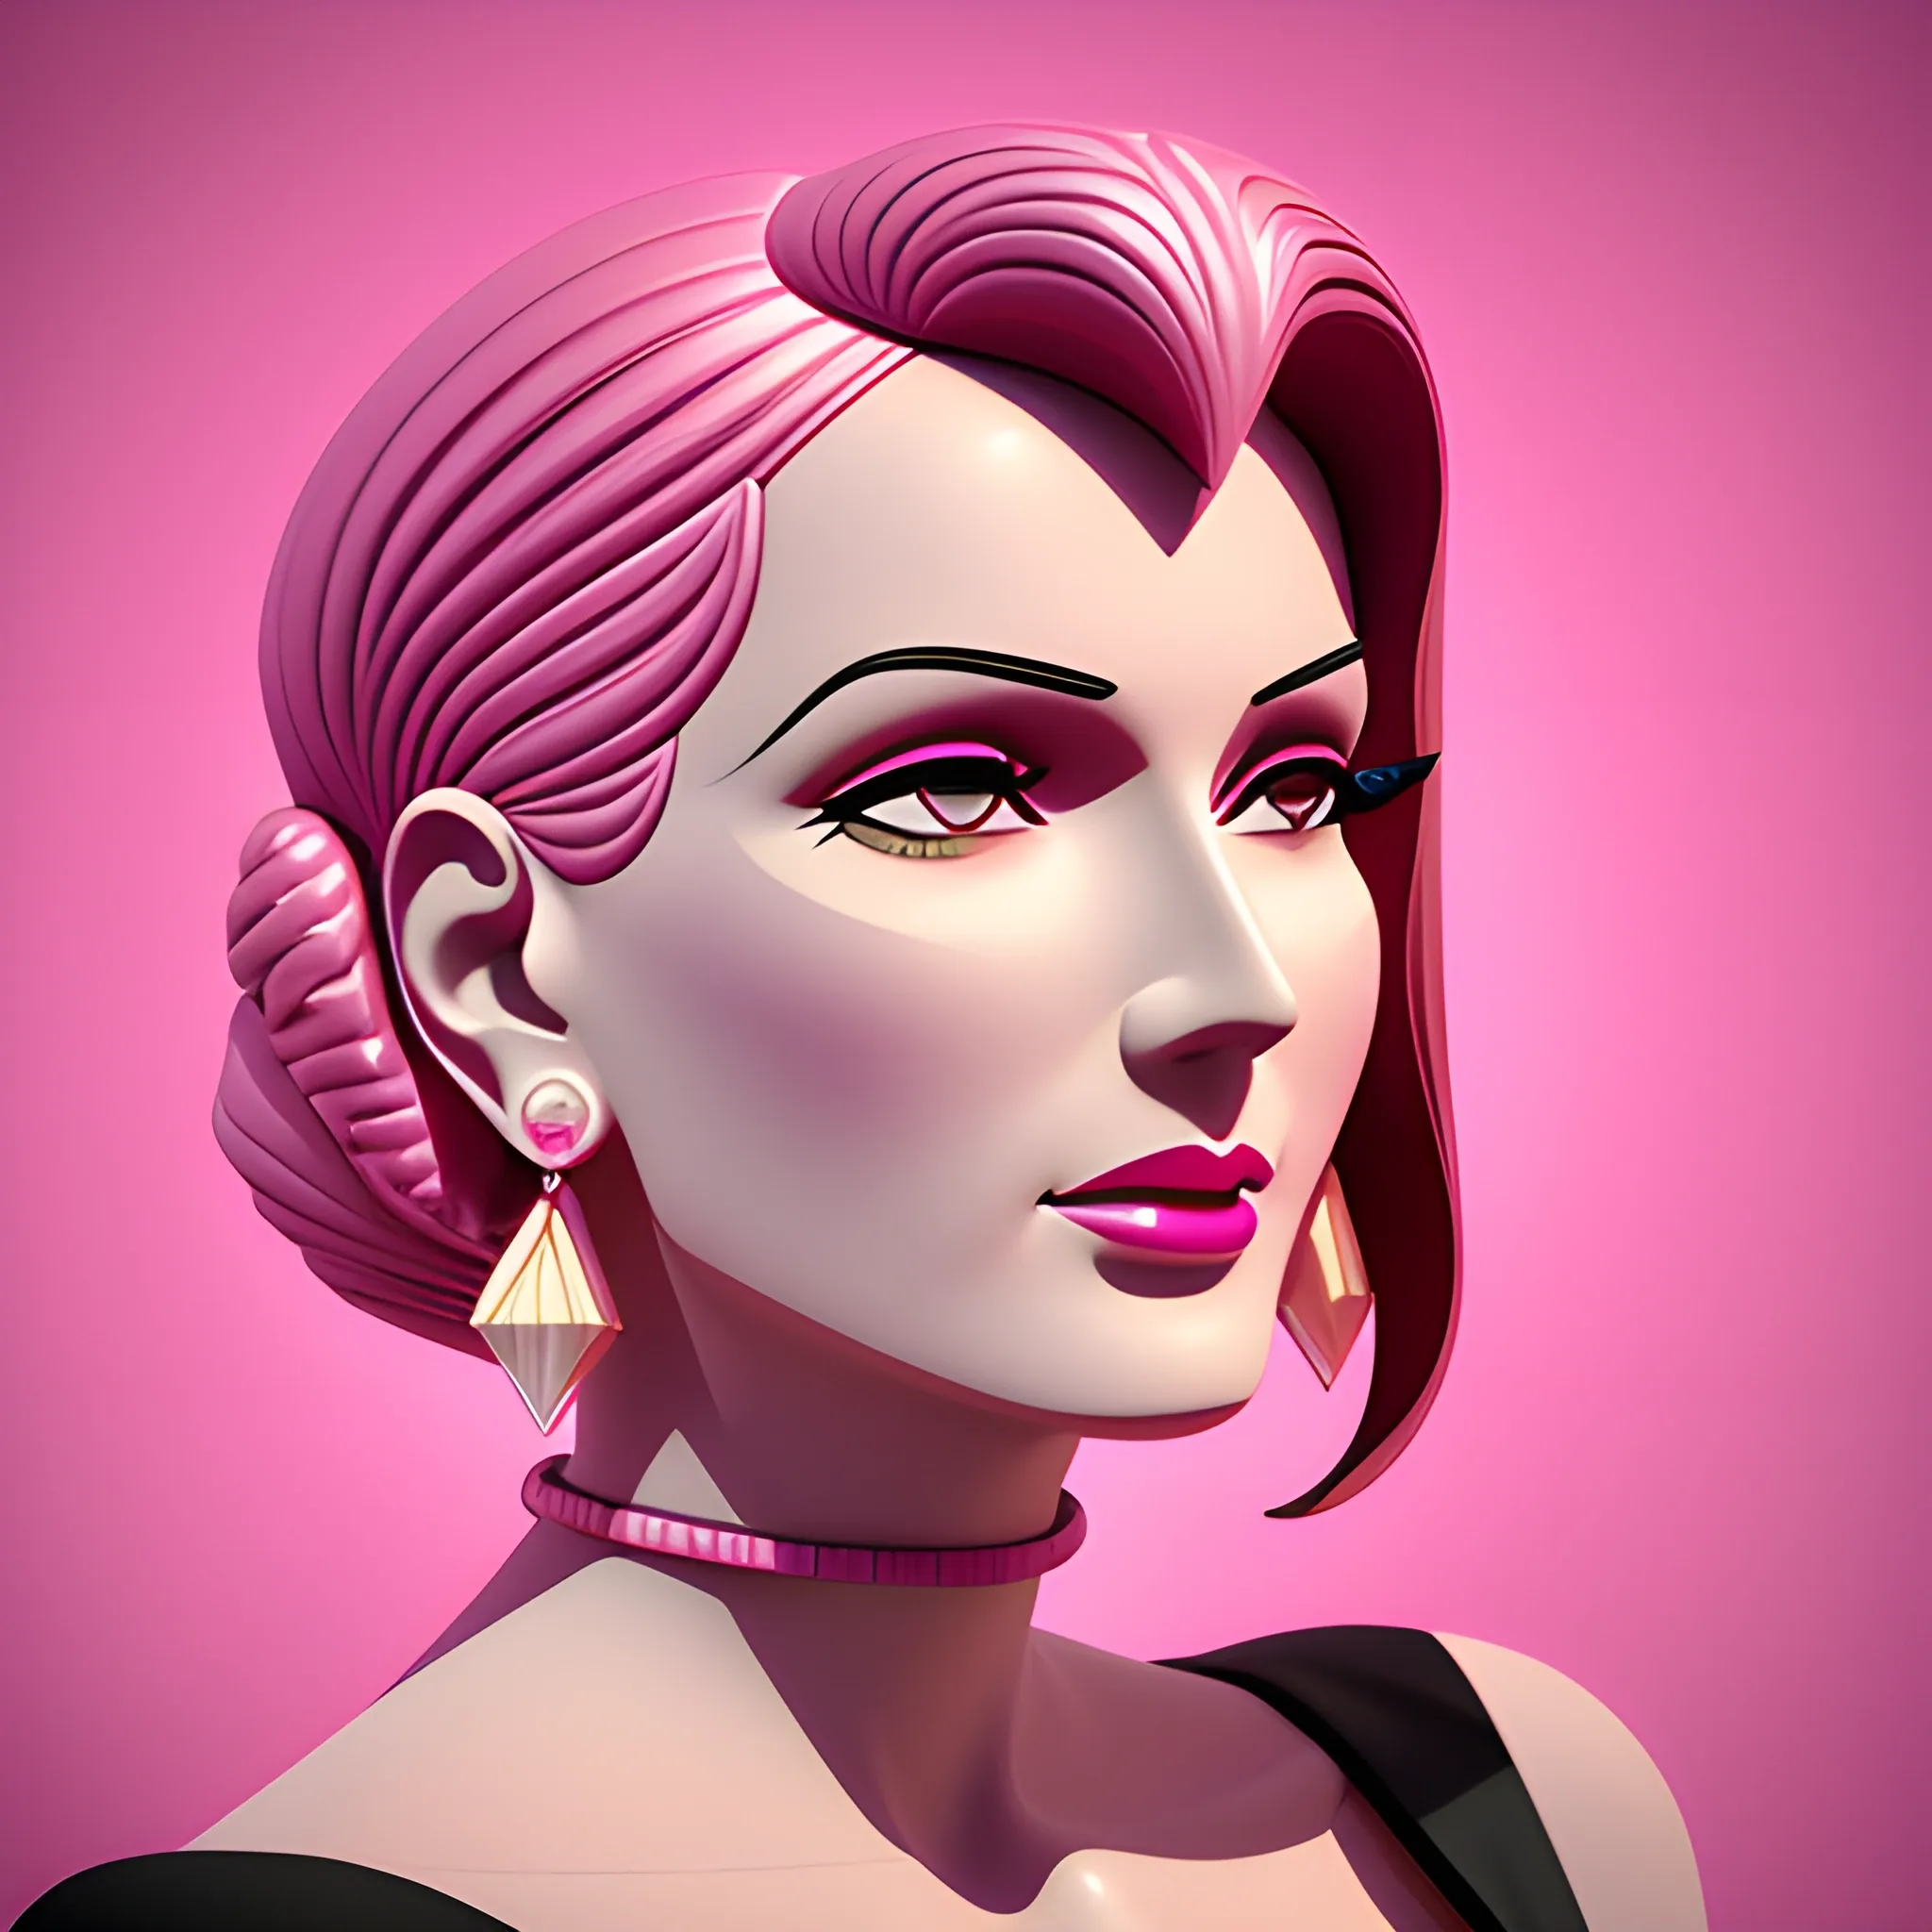 Art deco, woman wearing earrings, pink,  digital illustration style,. Very detailed and high quality, 3D, 3D, 3D, 3D, 3D